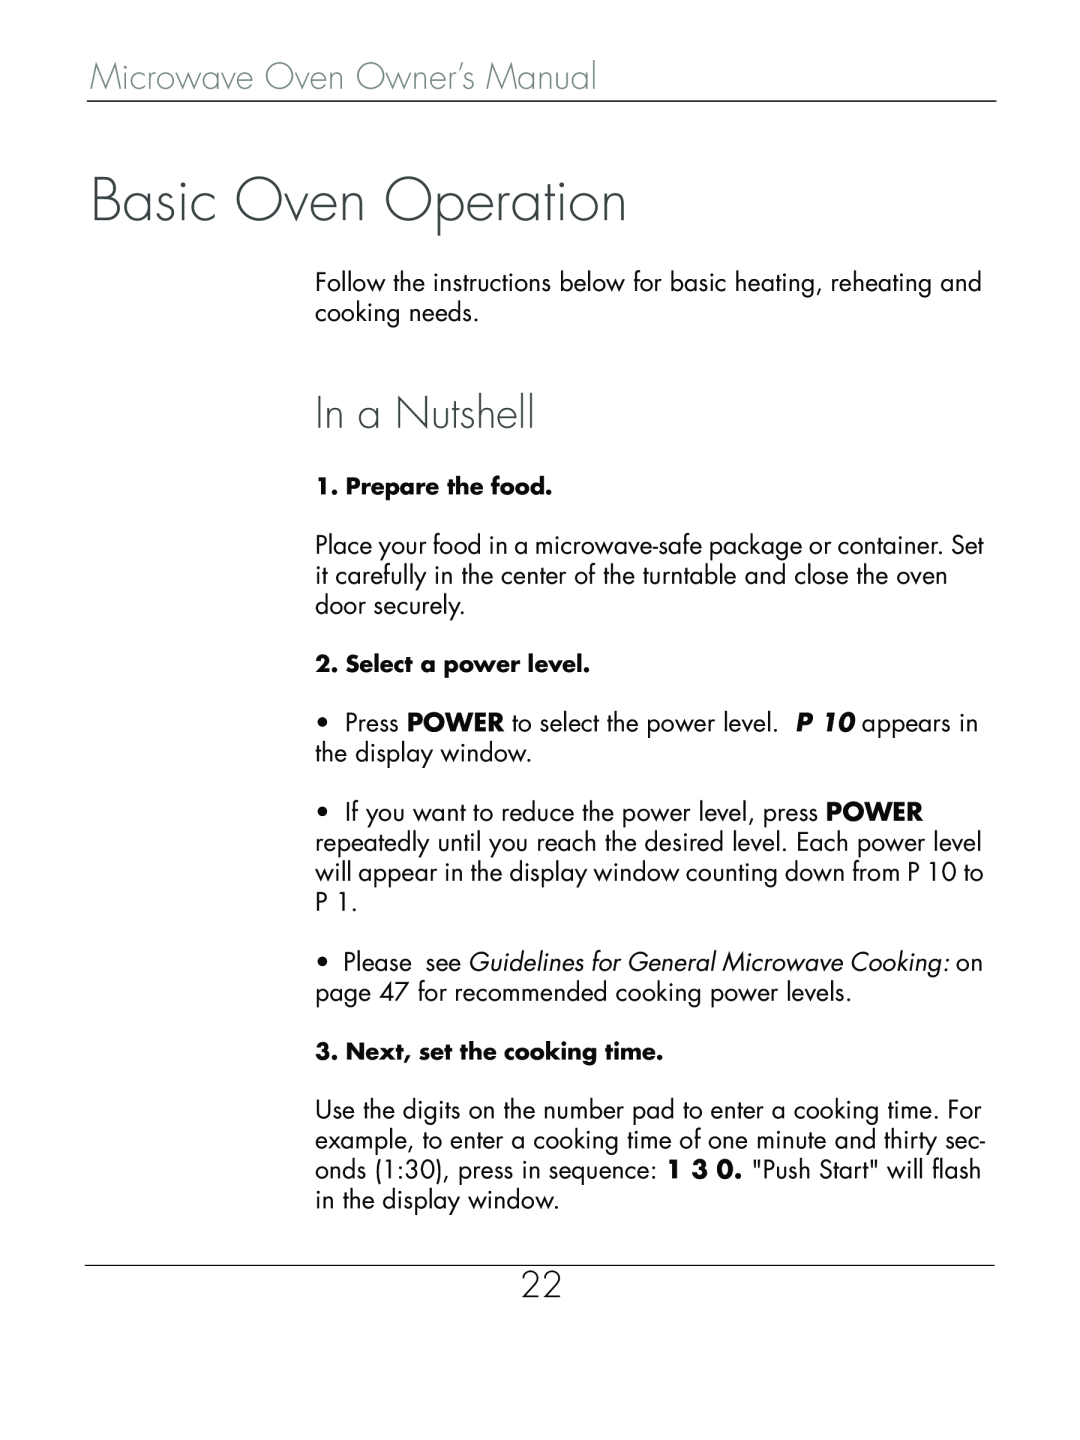 Beyond Microwace Oven manual Basic Oven Operation, In a Nutshell 